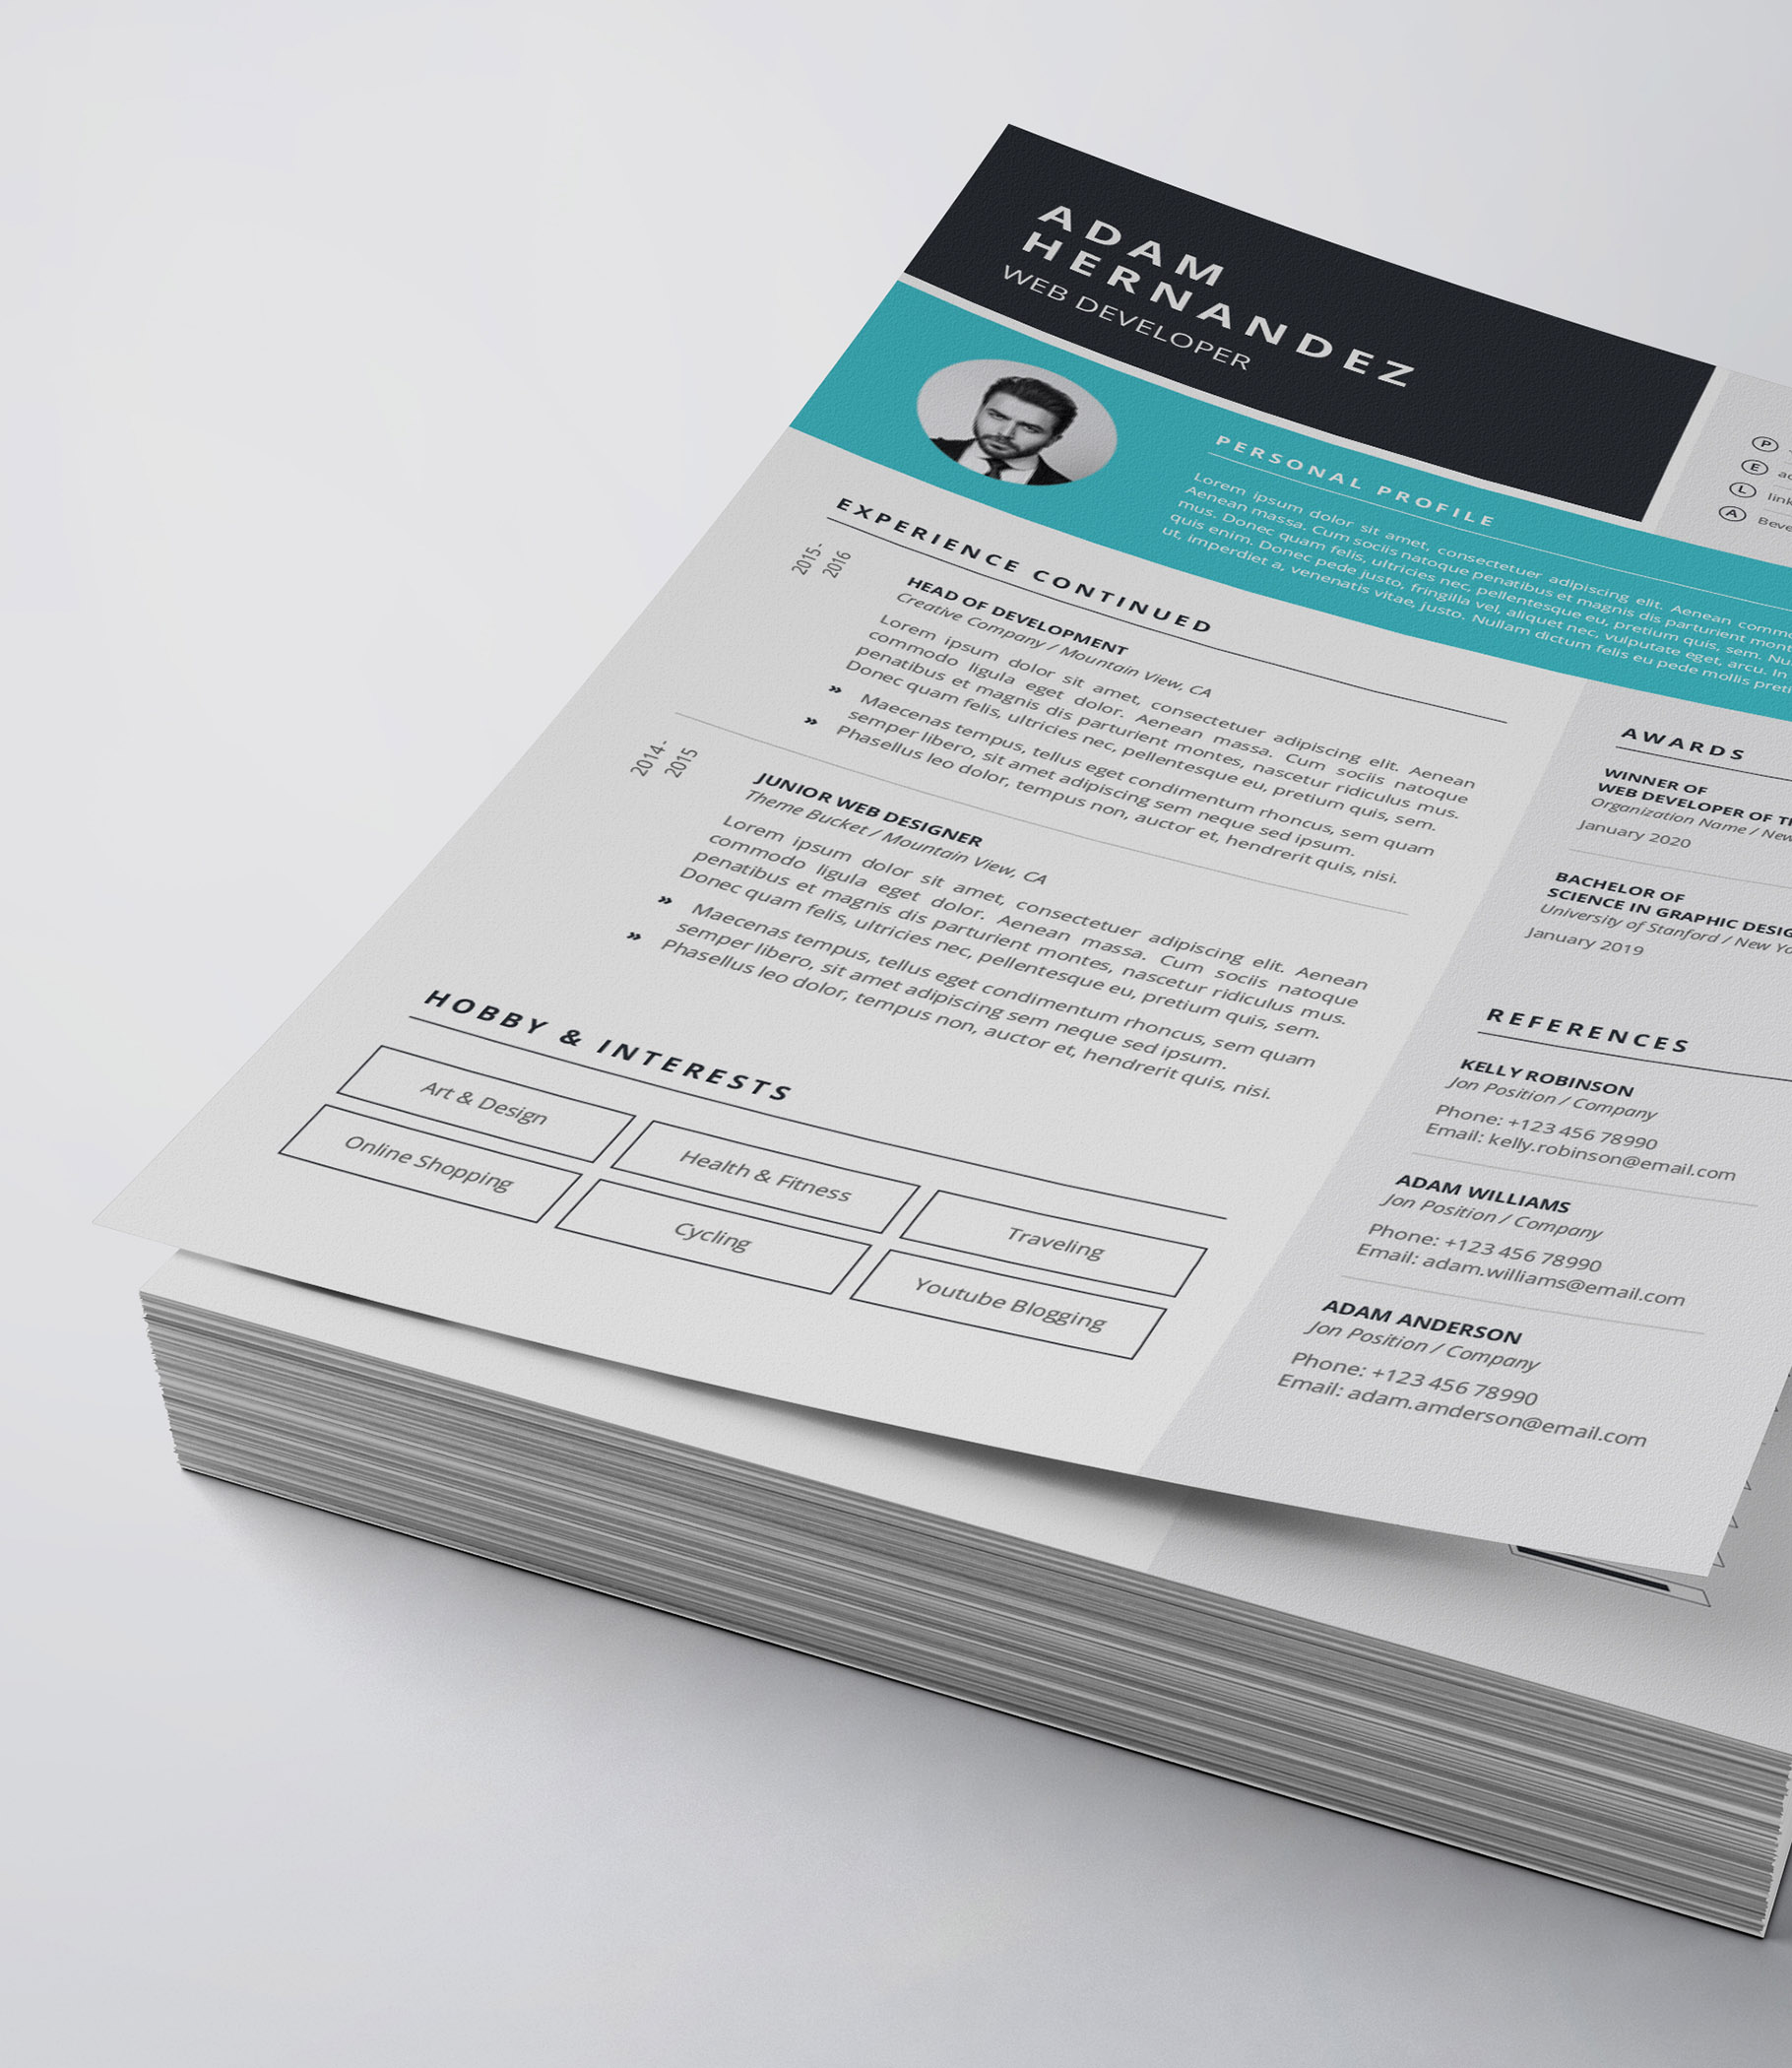 Clean and professional resume template on top of a stack of papers.